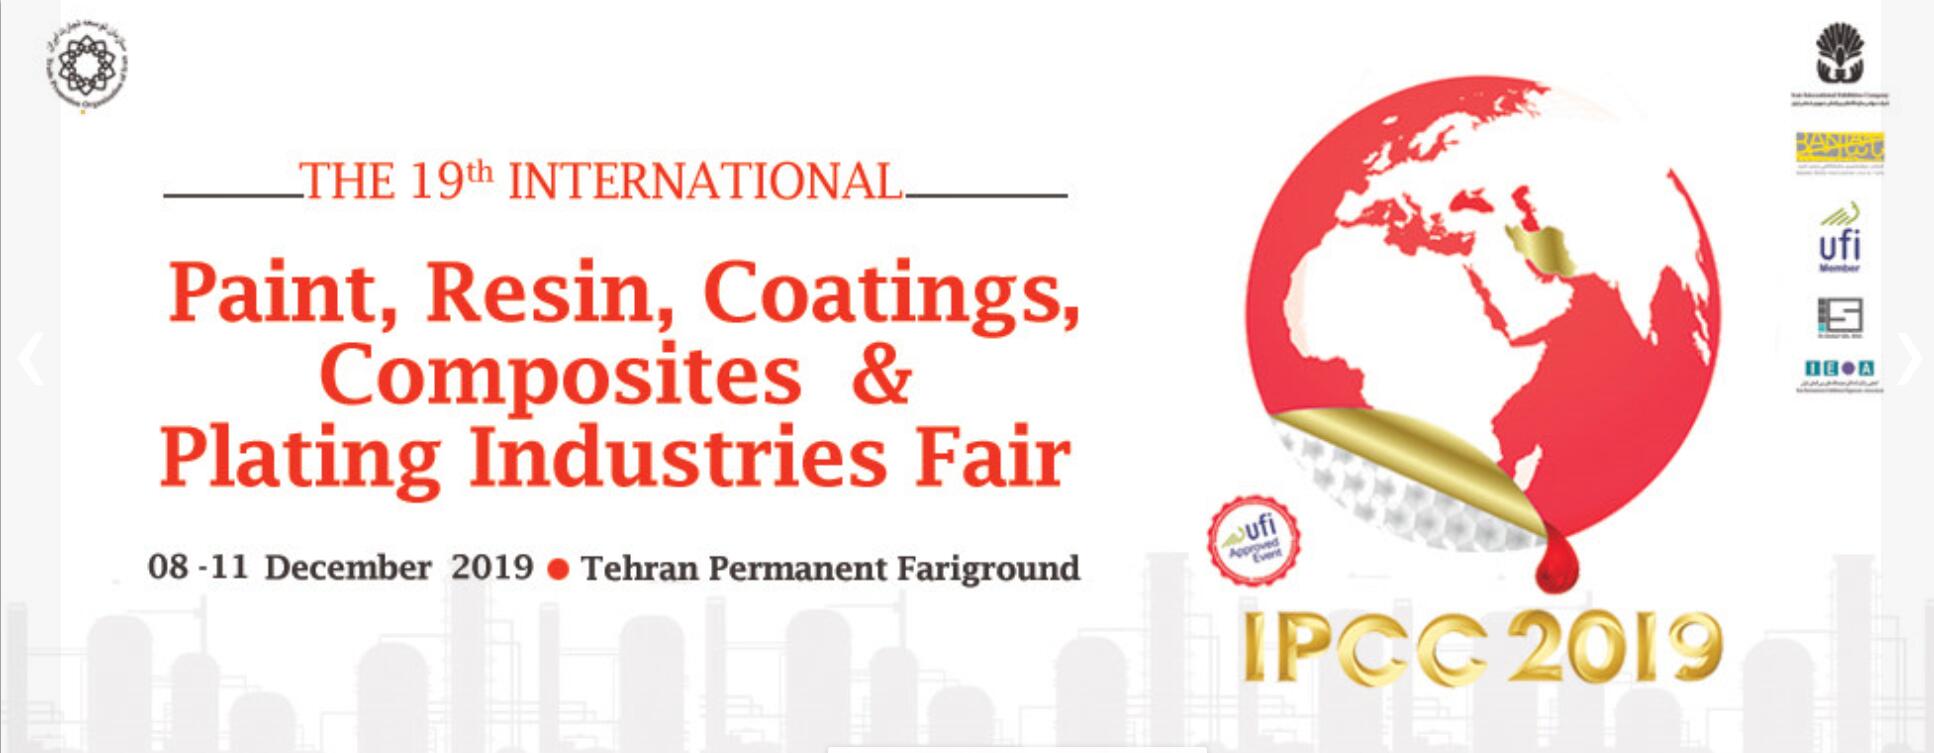 19th International Paint, Resin, Coating, Composites and Plating Industries Fair